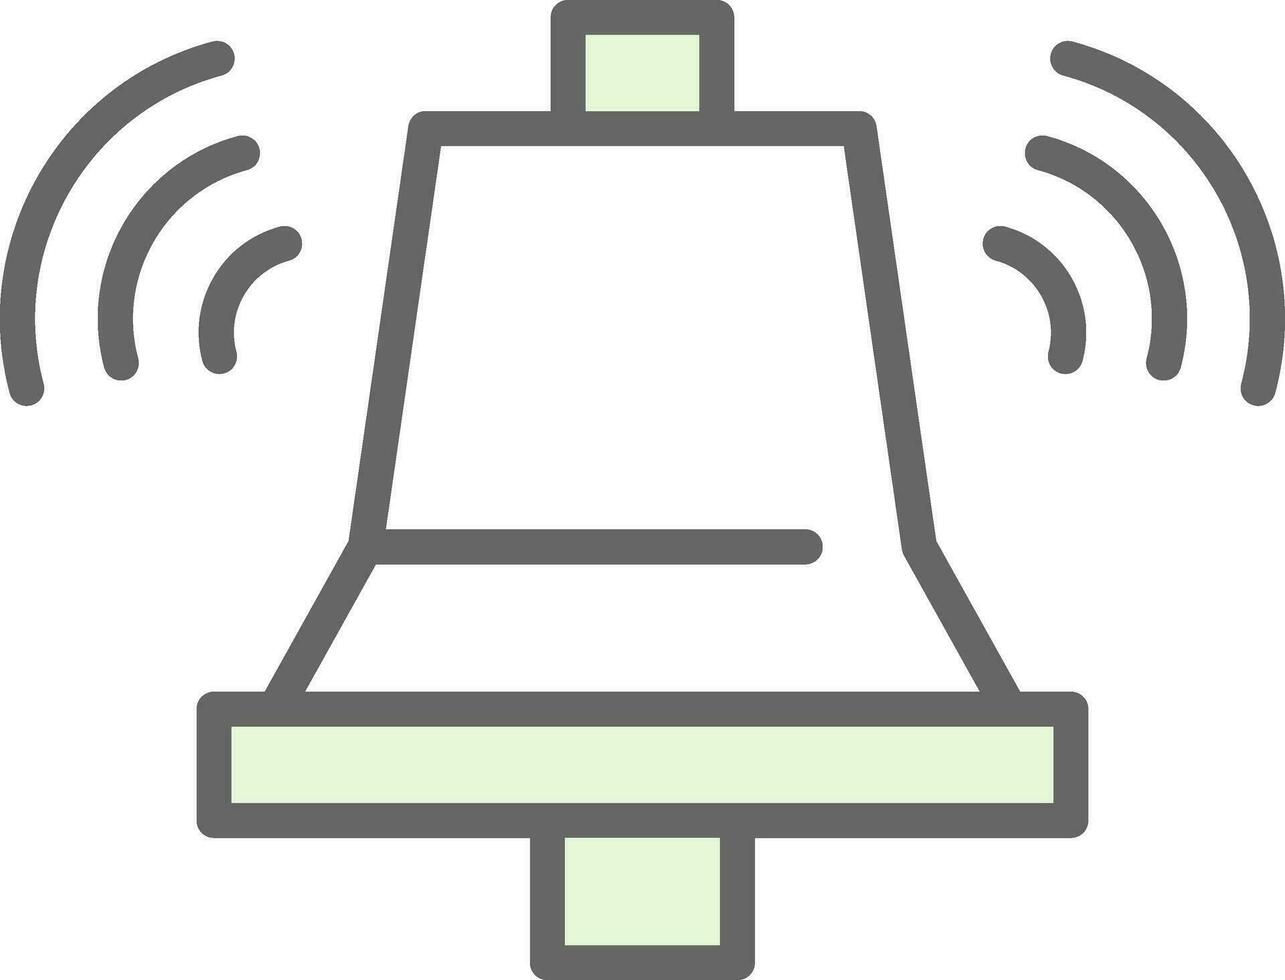 Ring Bell Vector Icon Design